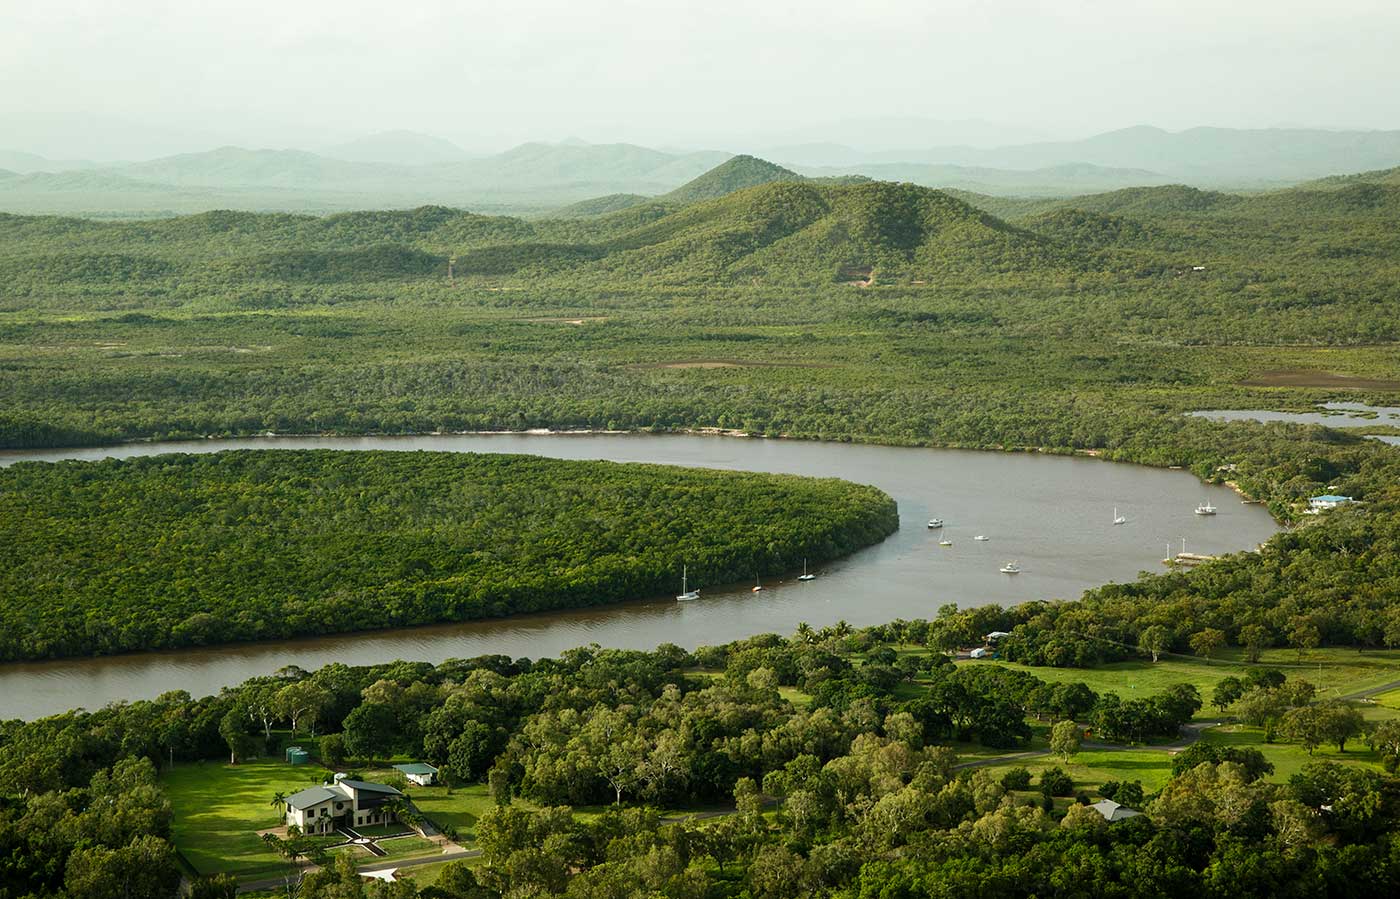 Aerial photograph of a river winding its way through lush green countryside. Several boats are moored on the river.